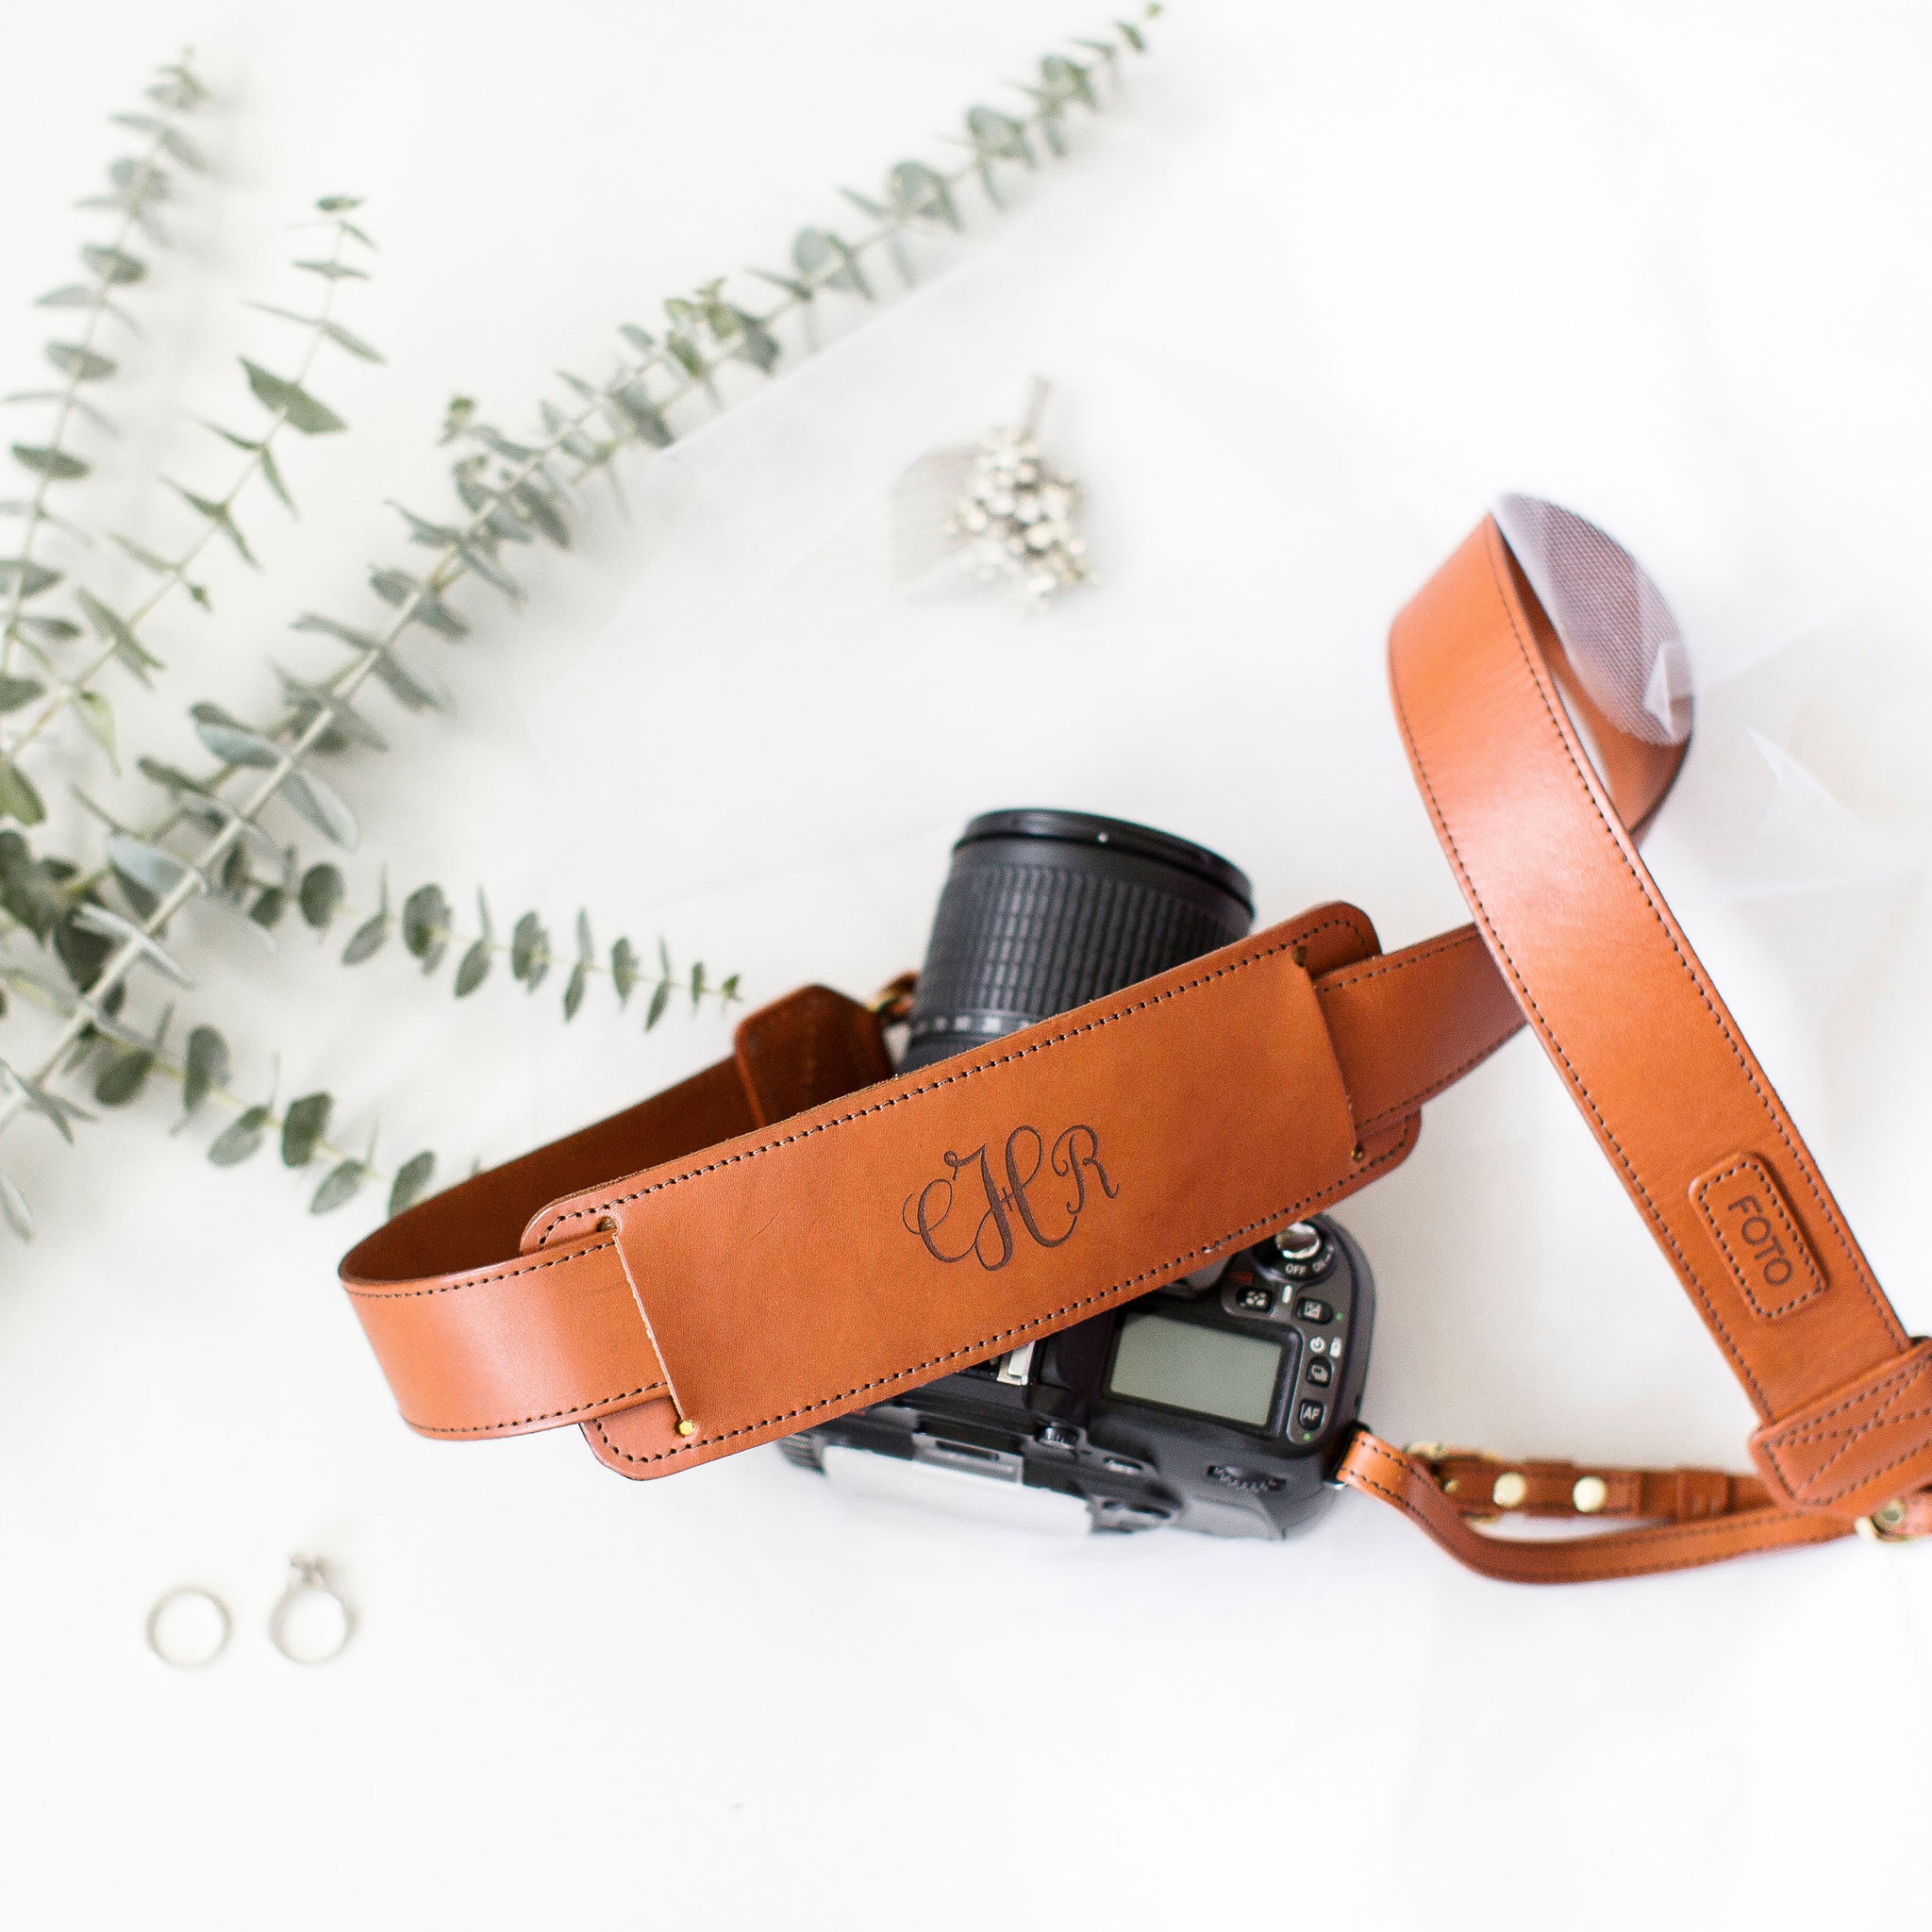 James Fotostrap for Newlyweds